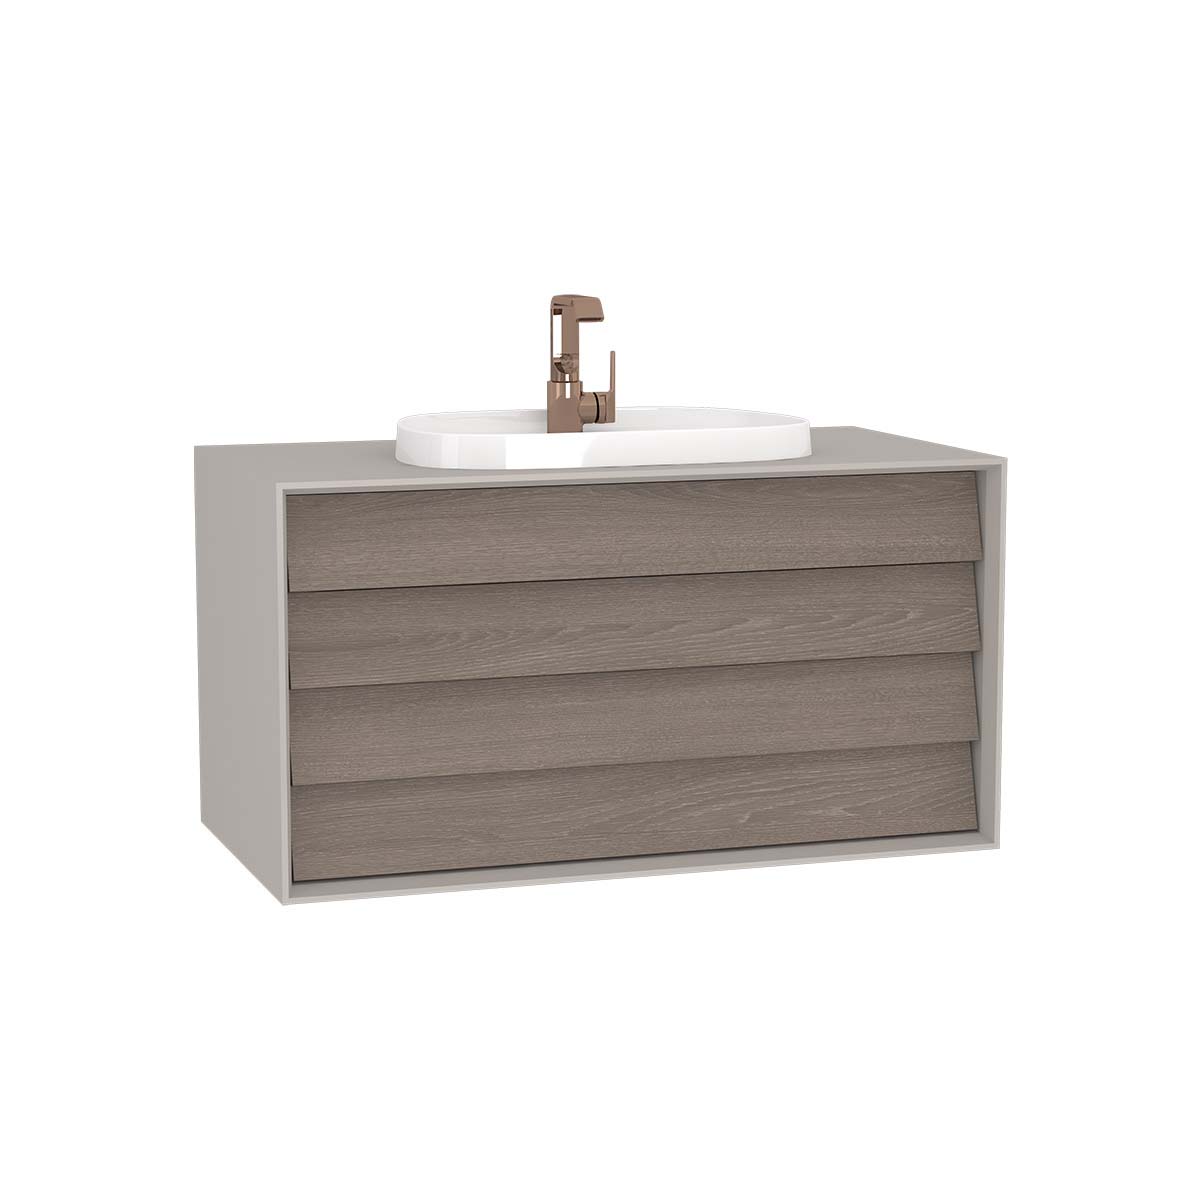 Frame Washbasin Unit, 100 cm, with 2 drawers, with countertop TV-shape washbasin, with faucet hole, Matte Taupe